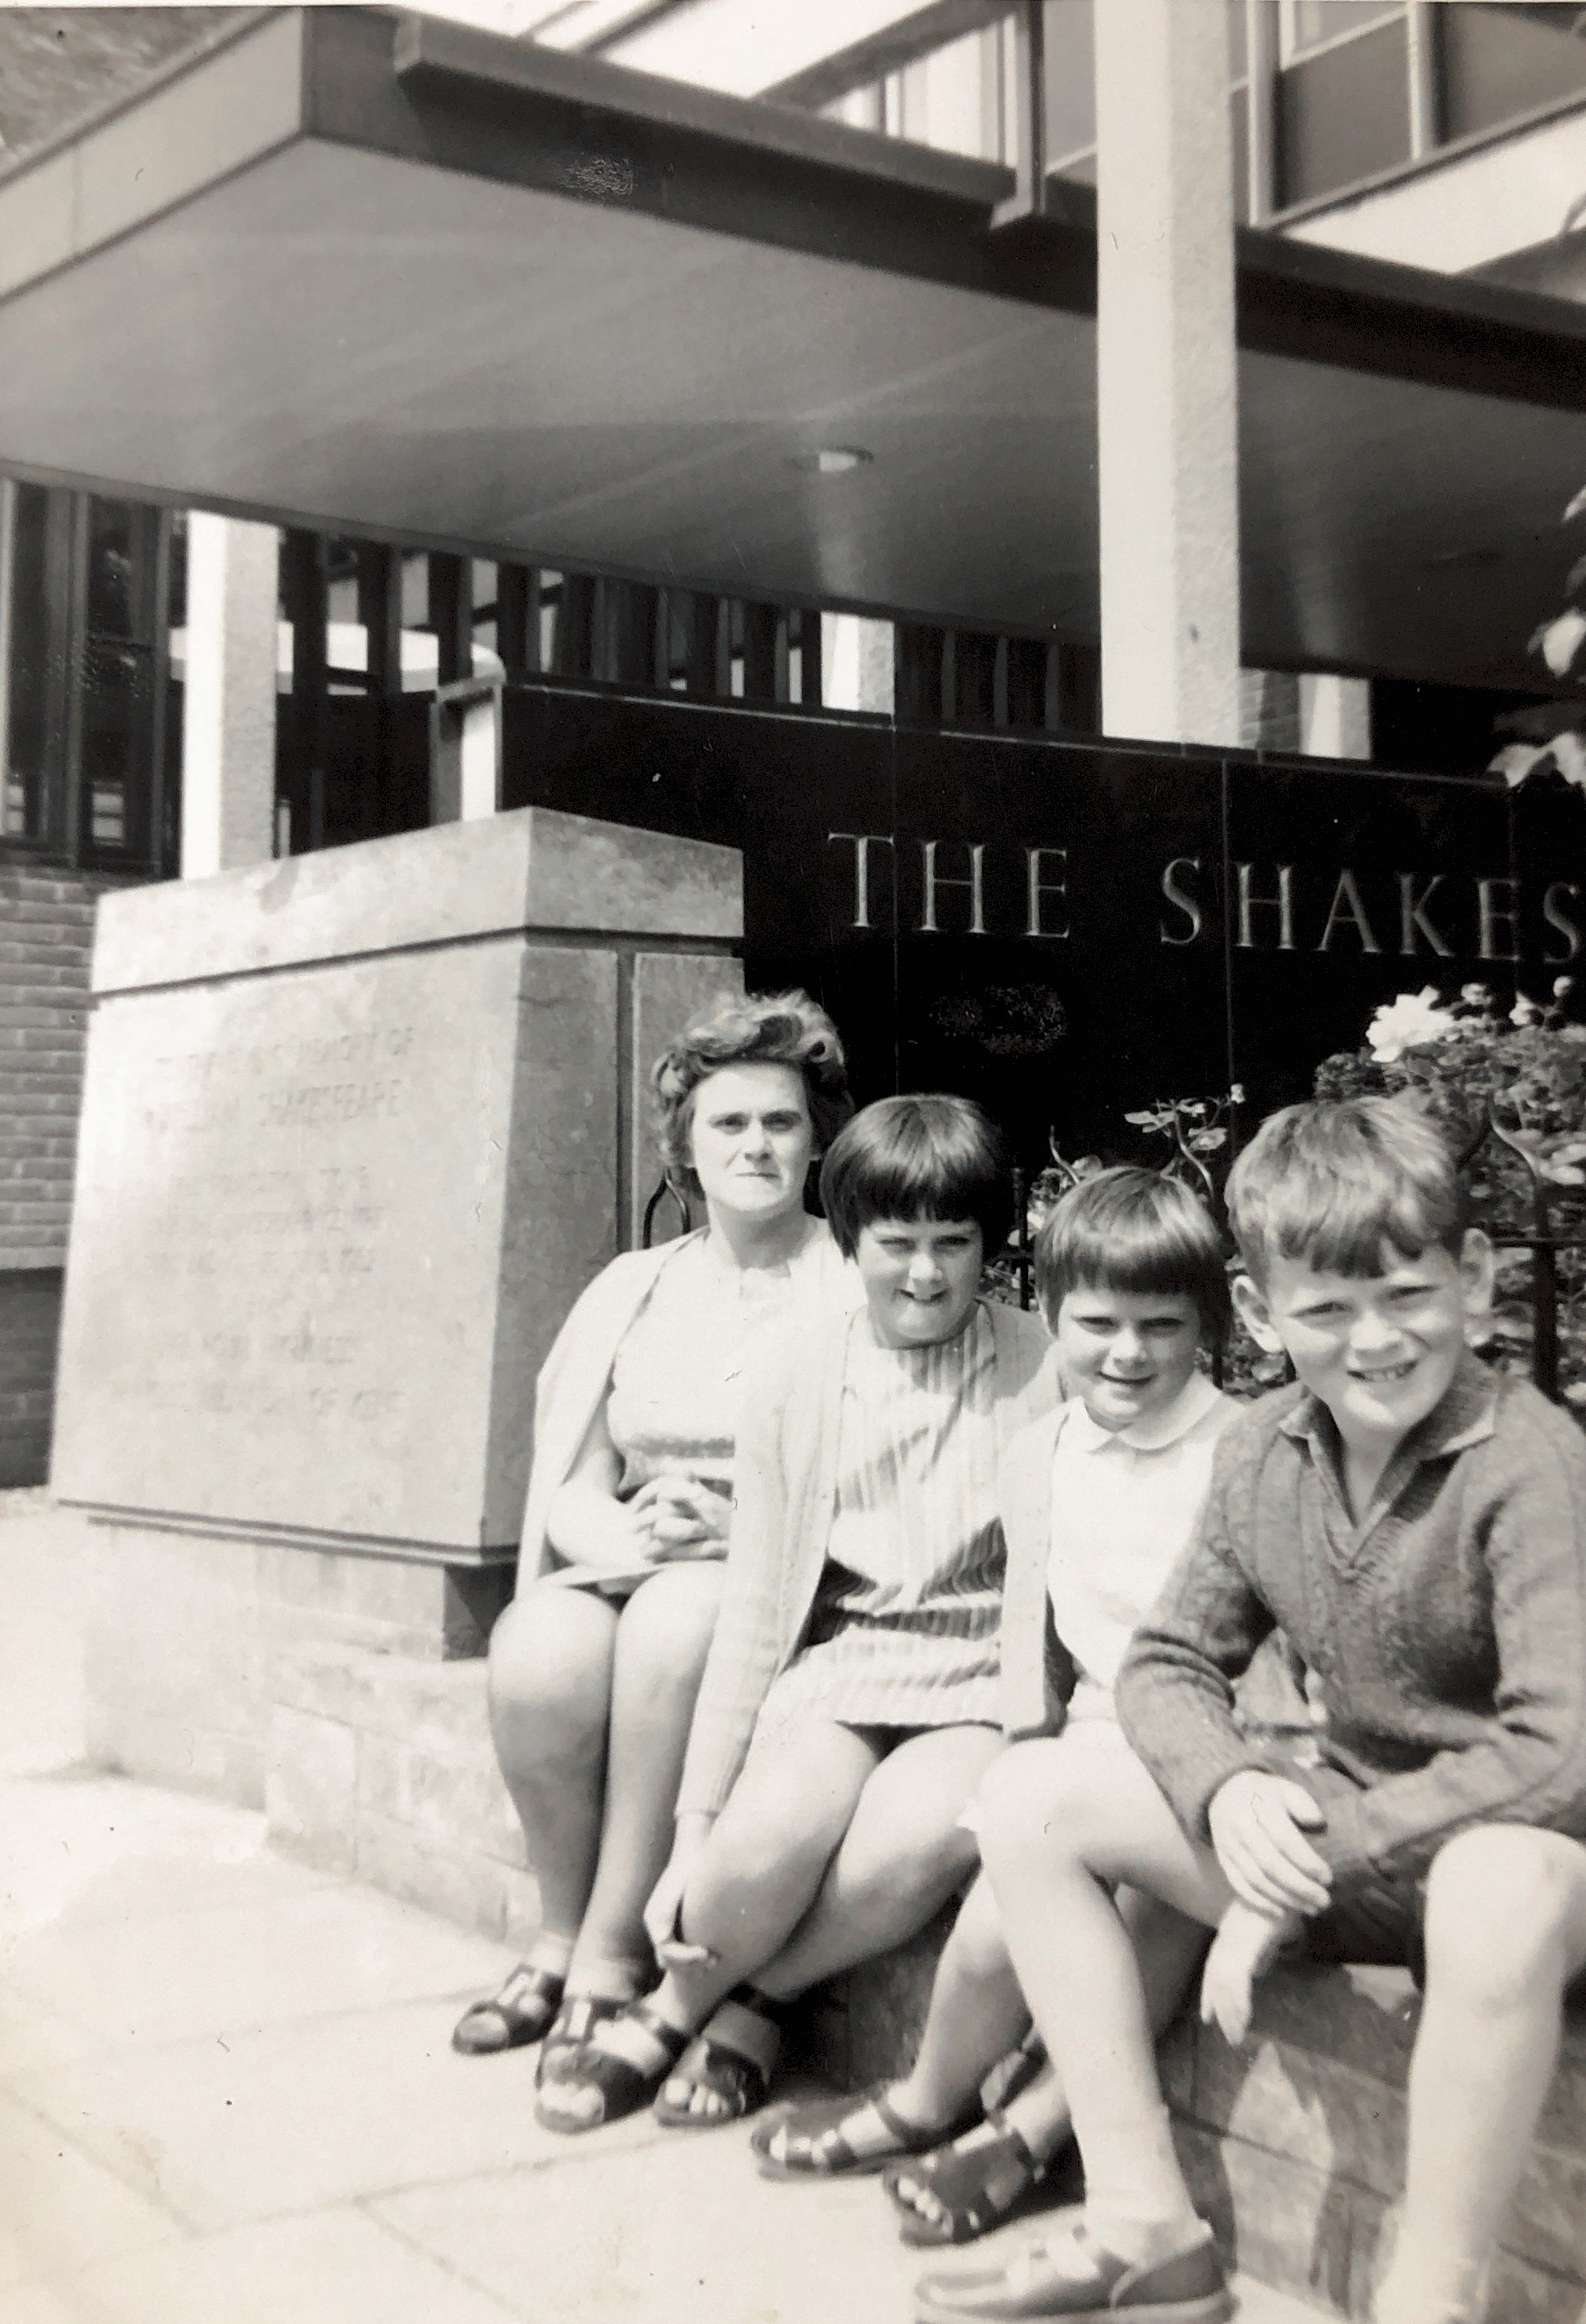 Kathleen Smith with her children, Catherine, Sarah and Richard on holiday in Stratford upon Avon  Late 1960s